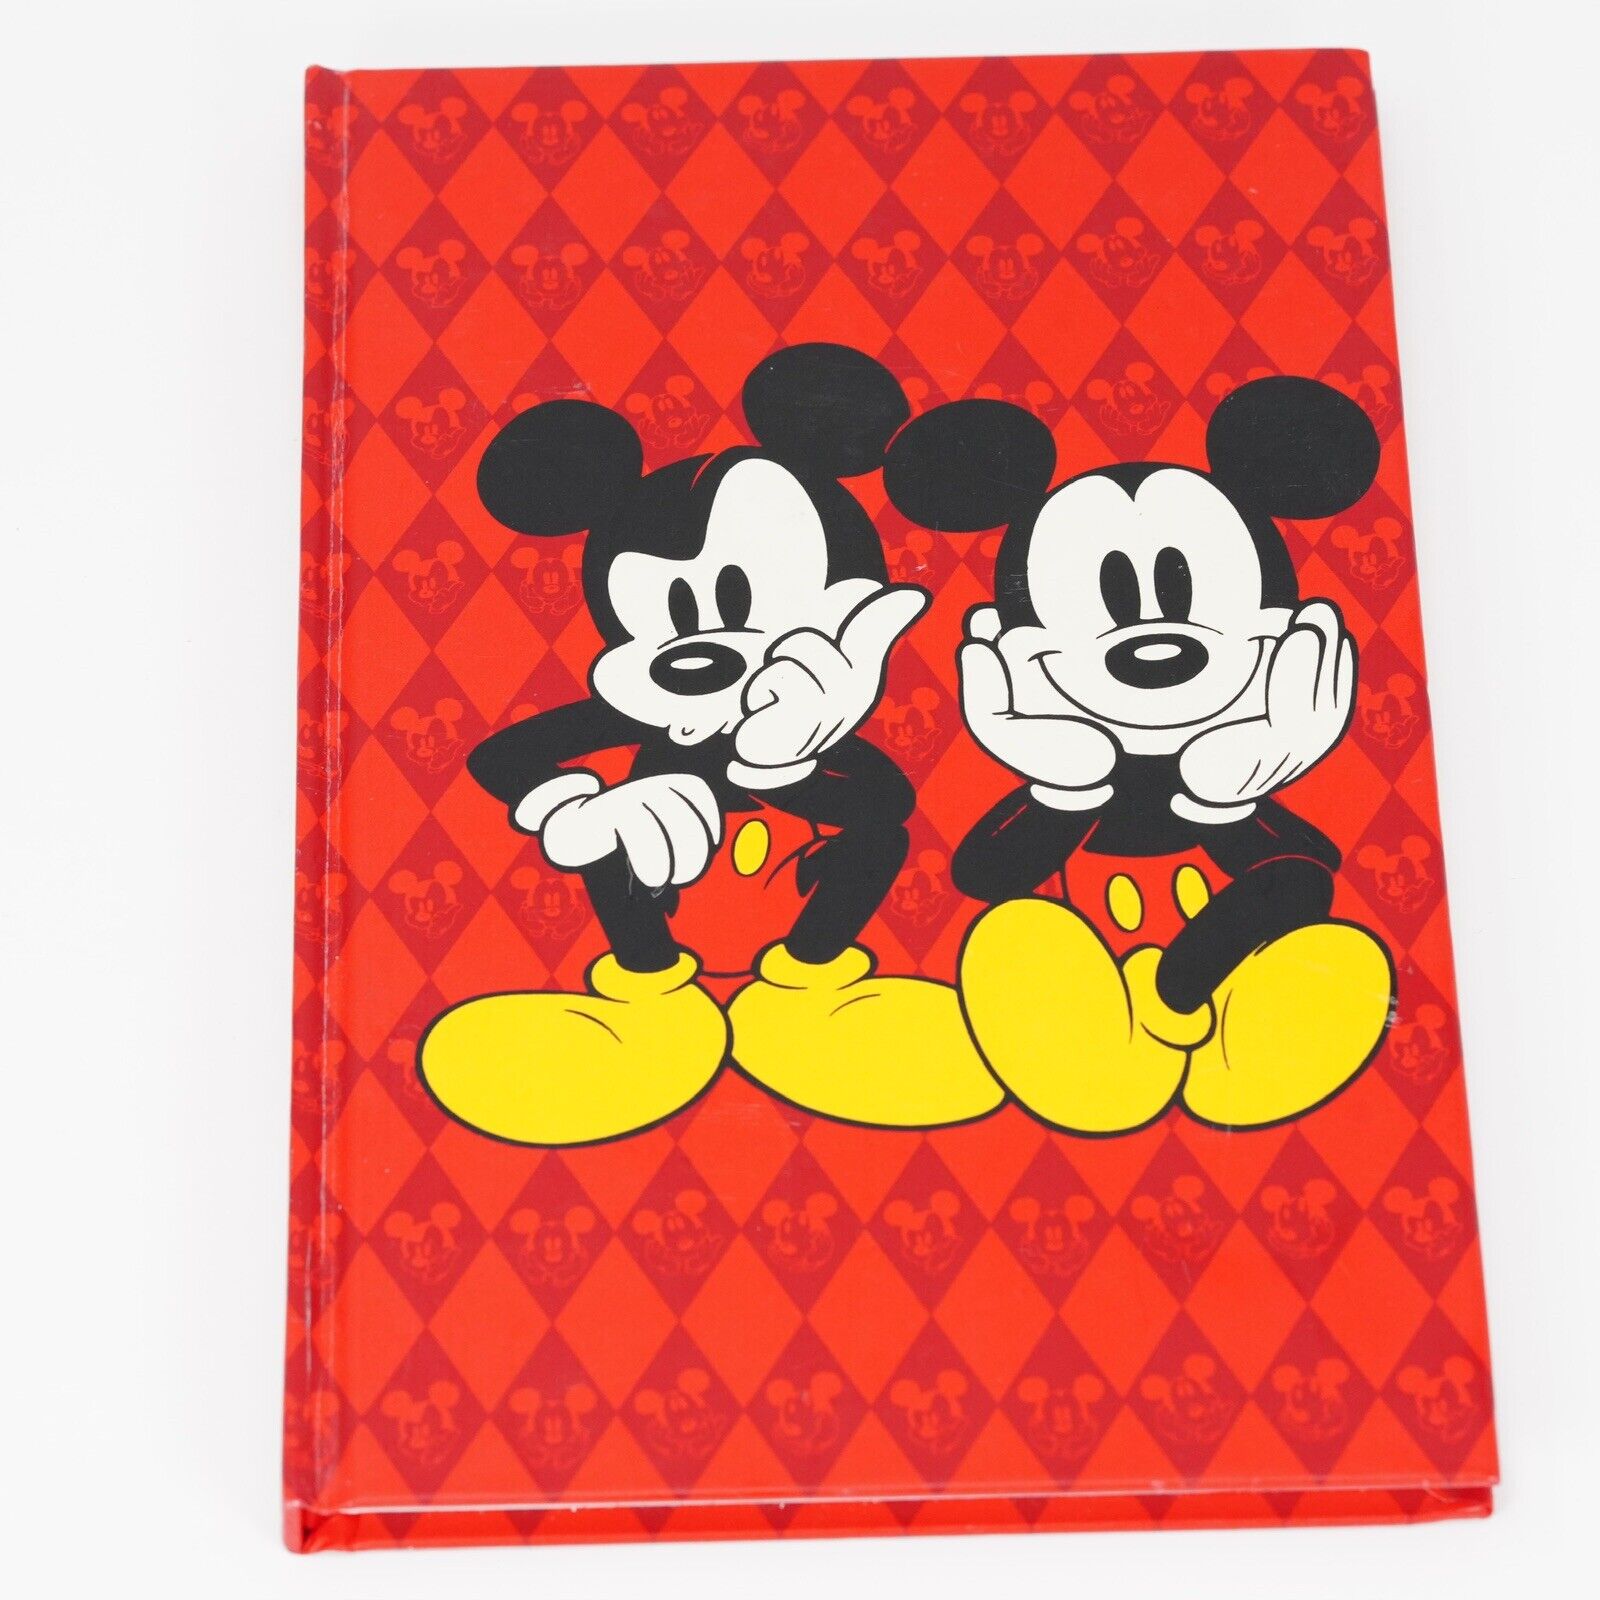 Disney Mickey Mouse Hardcover Journal Diary Notebook Made In Korea New Unused